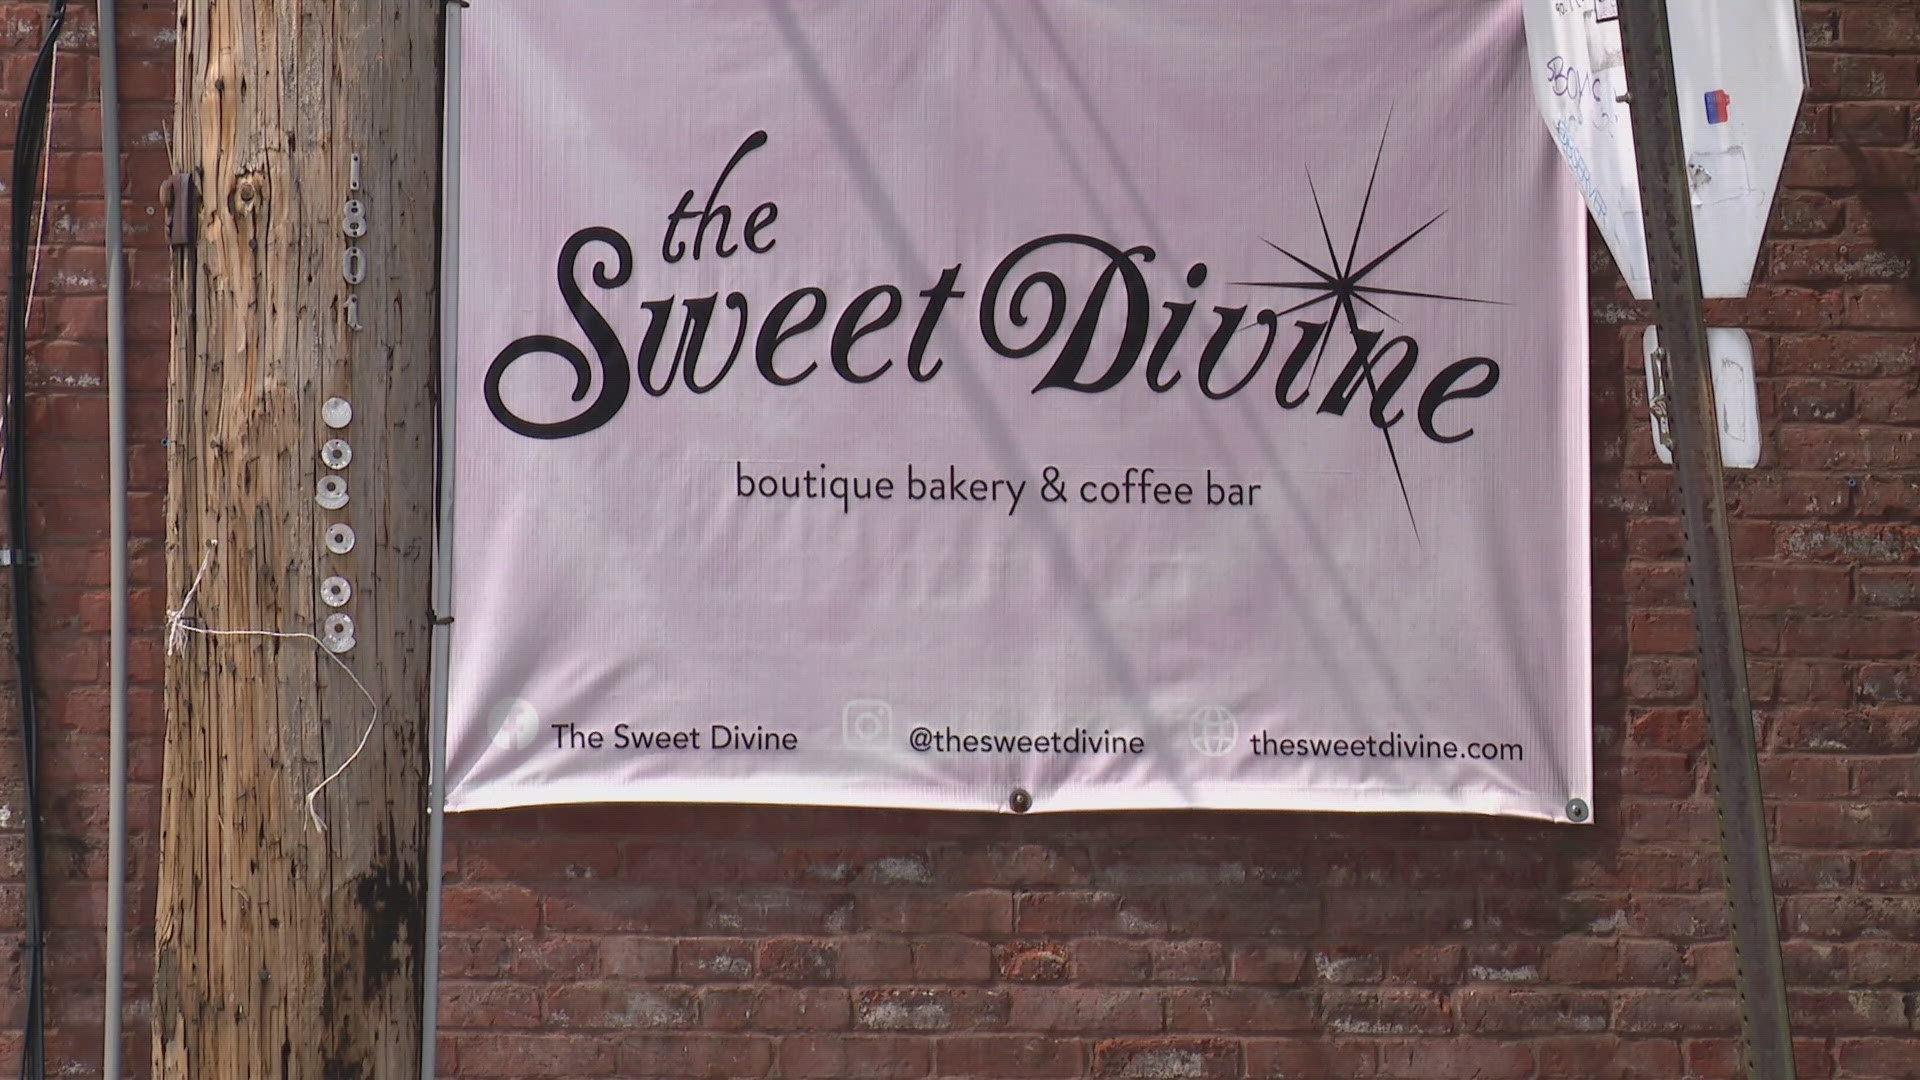 The Sweet Divine Bakery & Coffee Bar, located at 1801 S. Ninth St., will have its last day of business Saturday. It was in business for 13 years.